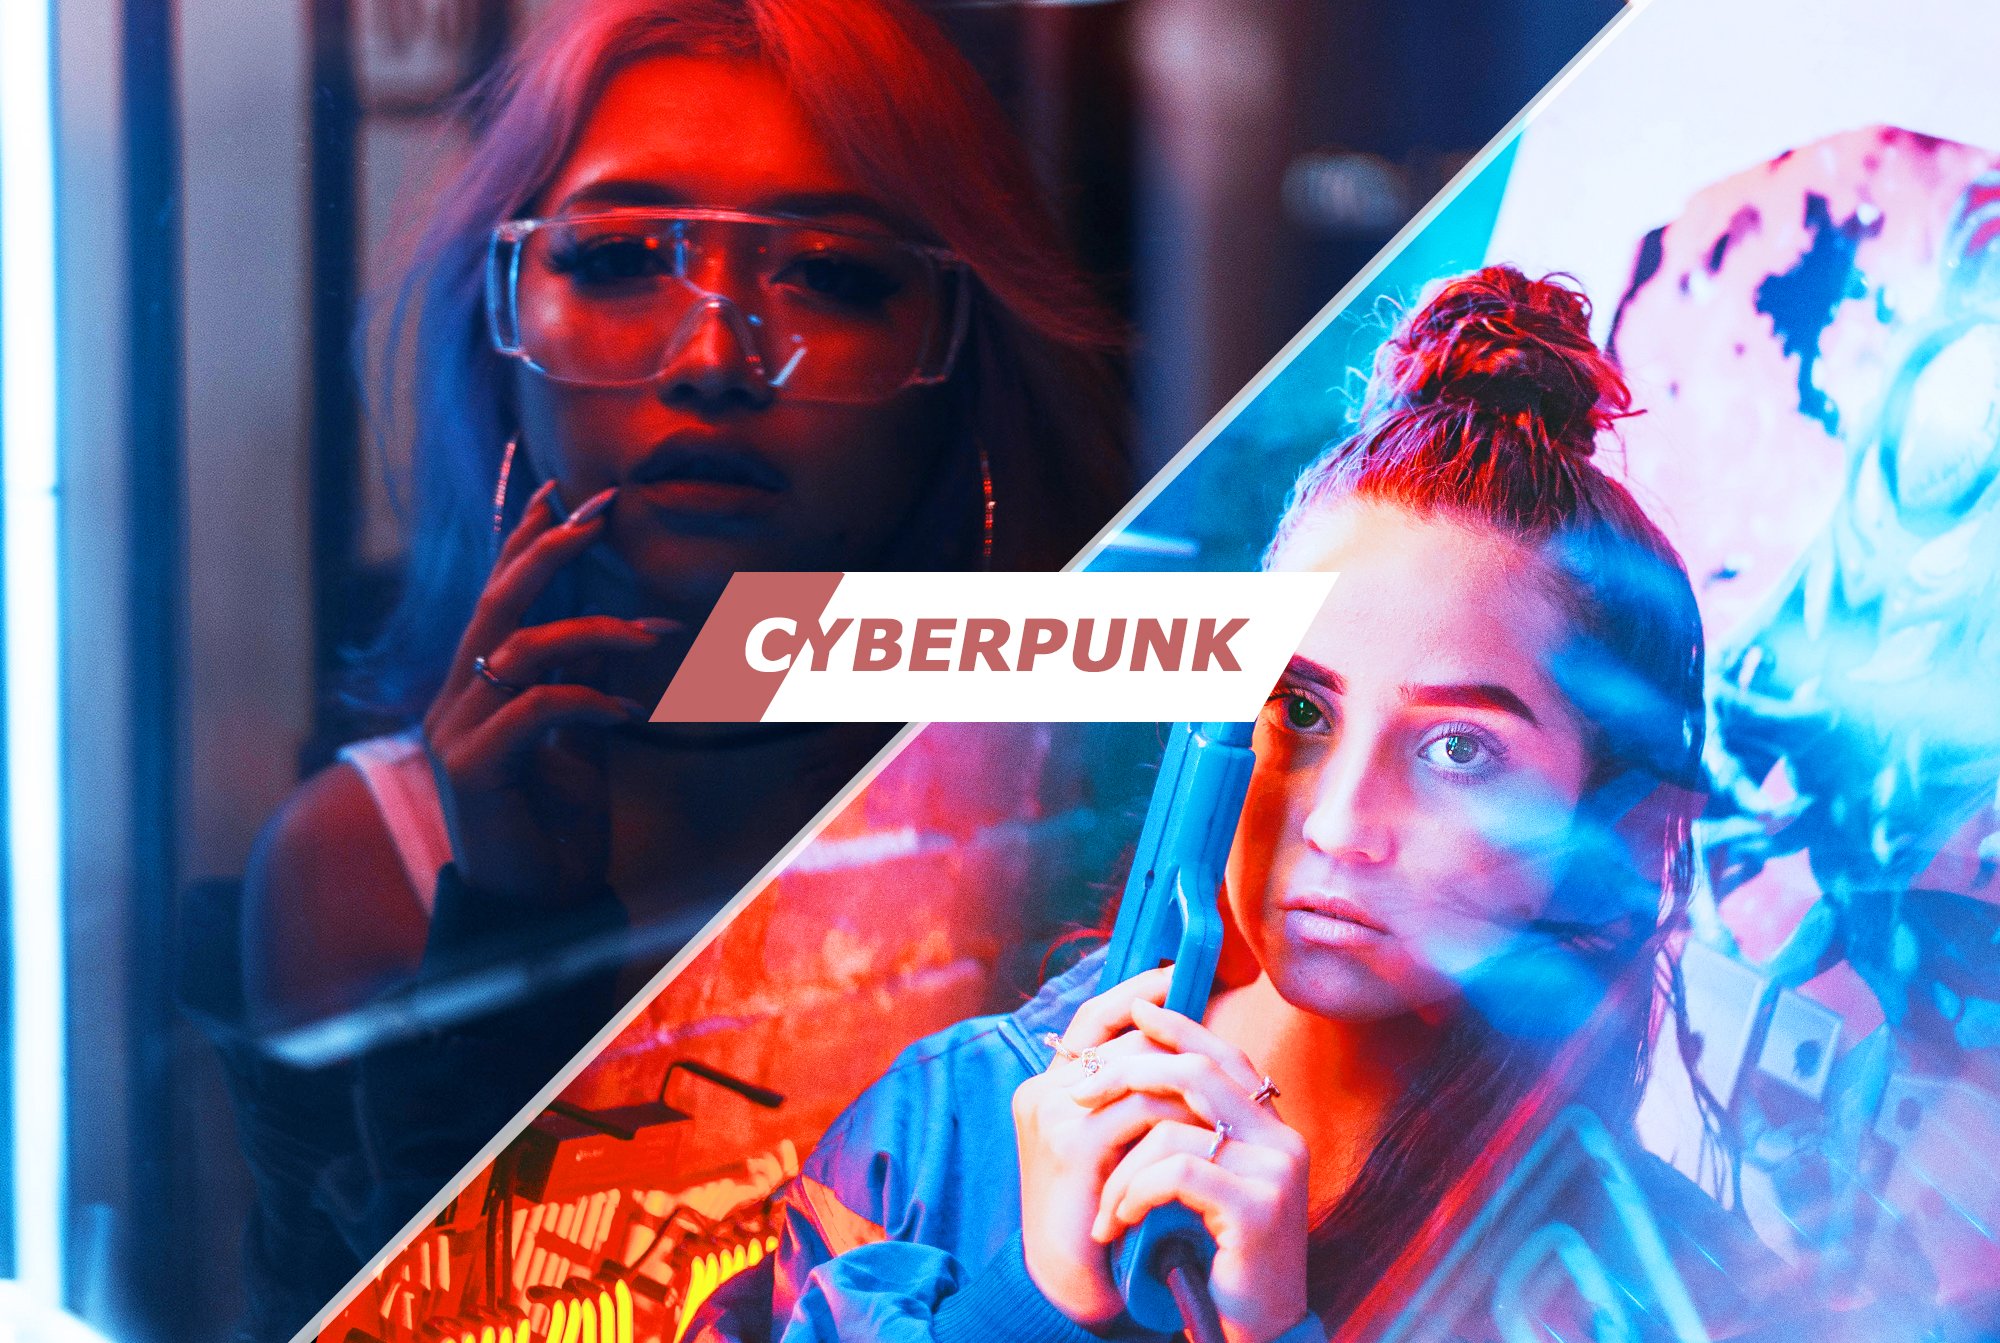 Cyberpunk Photoshop Actionscover image.